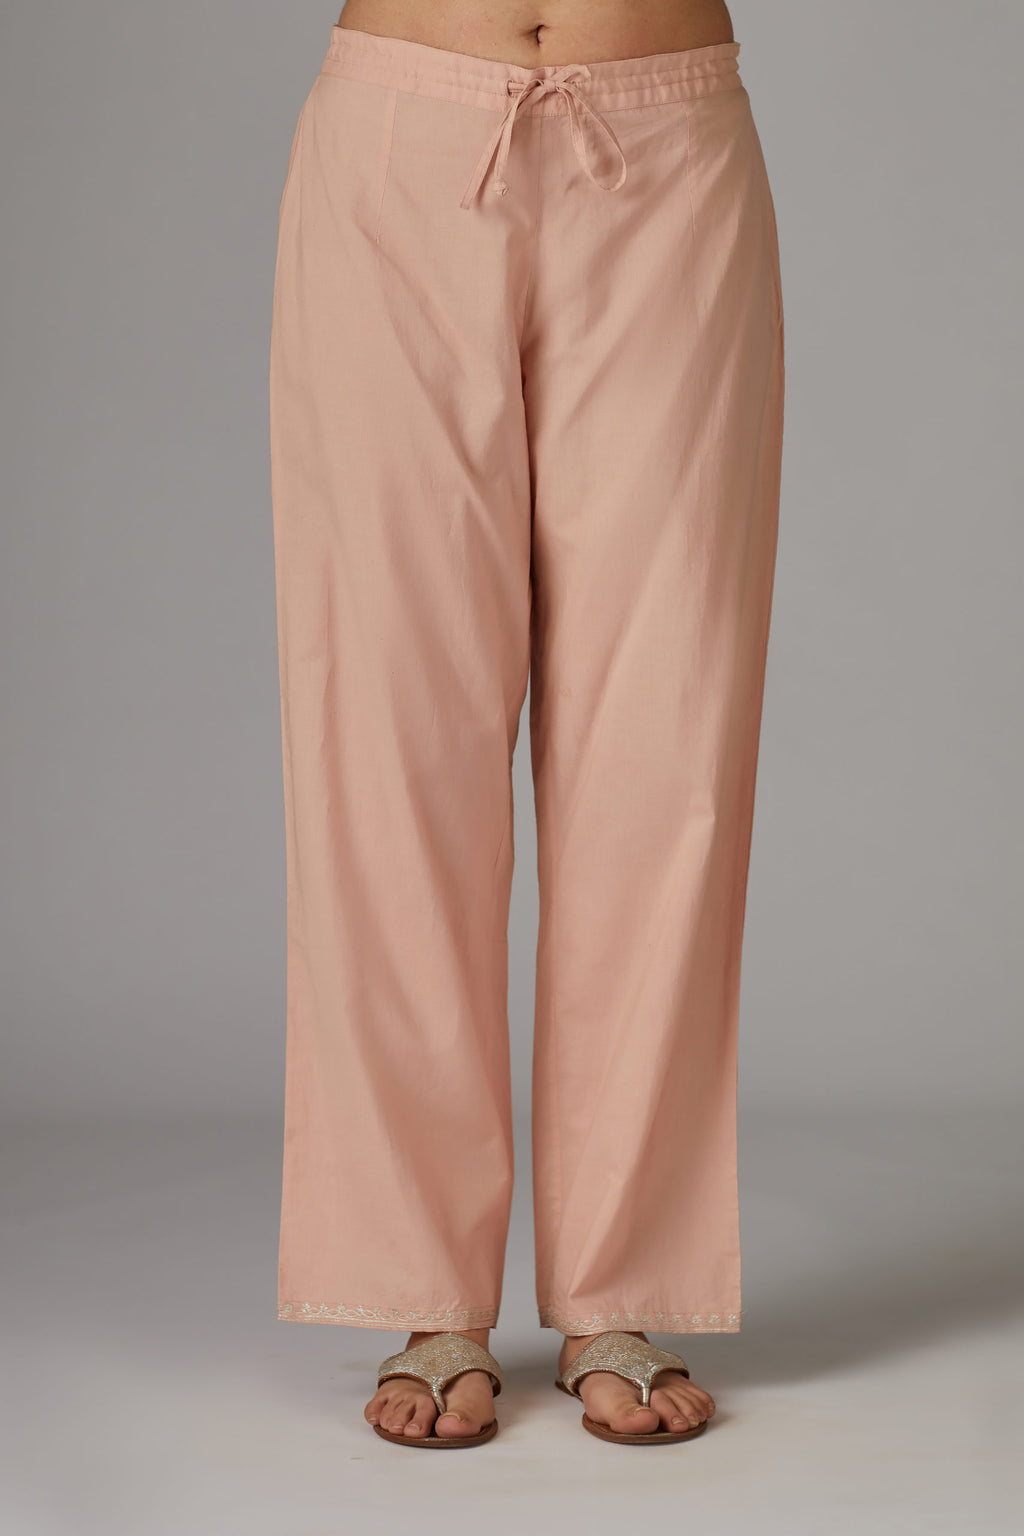 Pink cotton straight pants with aari embroidery at hem